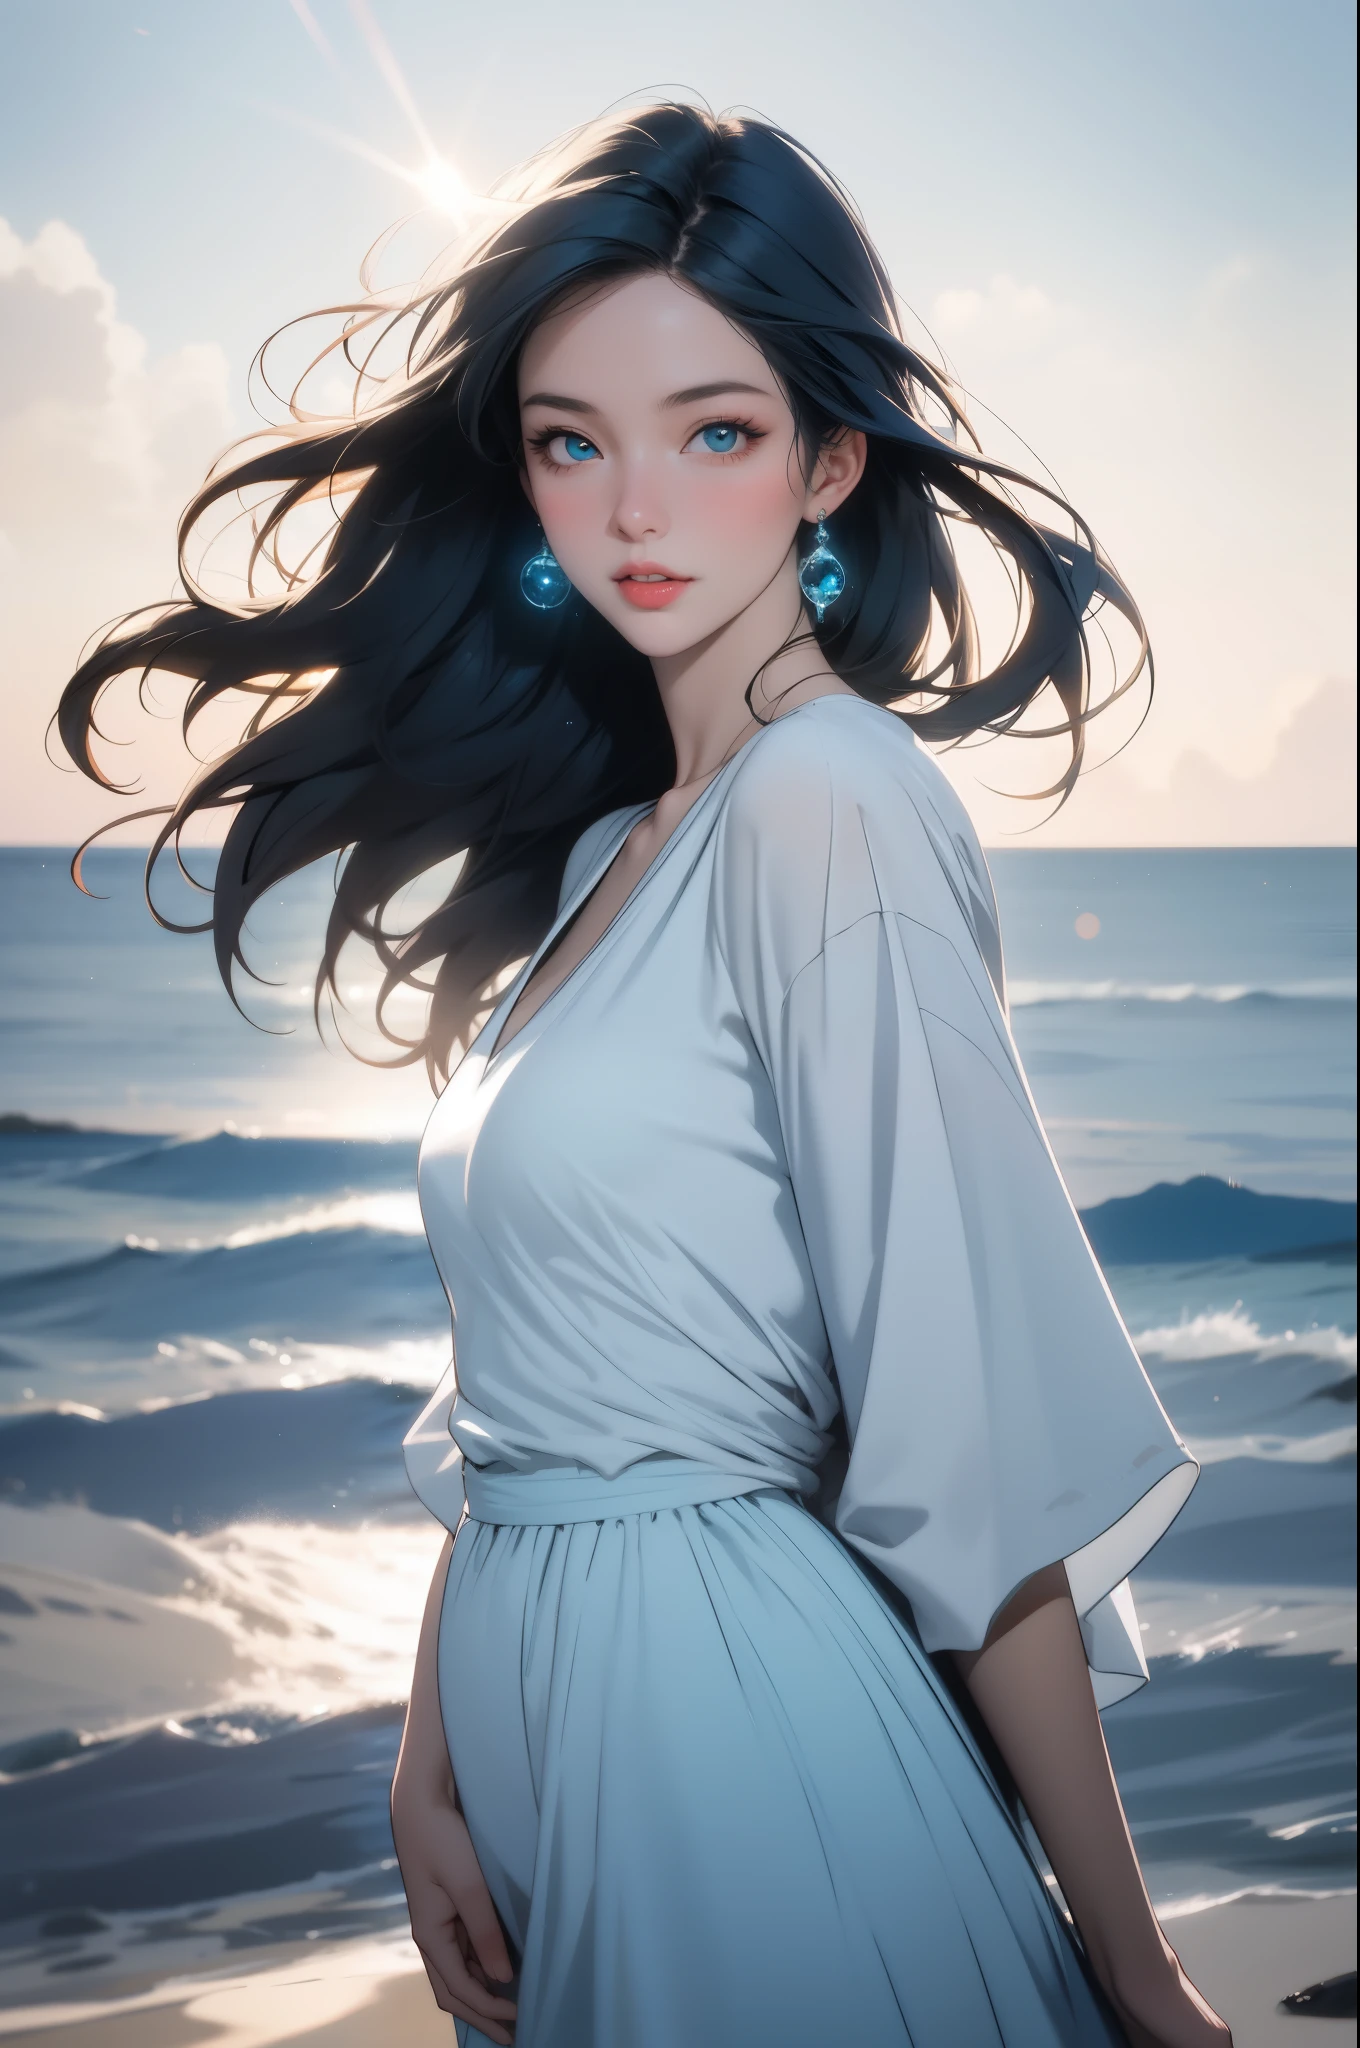 A girl standing on a rocky cliff overlooking the magnificent Blue Coast. The girl has beautiful detailed eyes, delicate eyebrows, a straight nose, and a pair of plump and rosy lips. She stands confidently with her arms akimbo, capturing the breathtaking view of the sparkling turquoise sea. The wind gently blows through her loose, flowing hair, giving the scene a sense of movement and . The Blue Coast is depicted with a realistic, photorealistic style, showcasing every detail of the shimmering water, rugged cliffs, and sandy beaches. The colors are vivid and vibrant, with shades of blue dominating the palette, symbolizing the tranquility and depth of the ocean. The sunlight casts a warm and golden glow on the landscape, creating a visual spectacle. The girl is dressed in a flowing white dress, which contrasts beautifully with the blue tones of the sea. Her dress billows in the wind, adding a dynamic element to the composition. The entire scene is bathed in soft, natural lighting, accentuating the textures and depth of the cliffs and sea. To ensure the best quality and ultra-detailed output, please use (best quality, highres, masterpiece), ultra-detailed, (realistic, photorealistic, photo-realistic) tags. The image should have sharp focus and exhibit physically-based rendering. The colors should be vivid and the lighting should be carefully crafted to enhance the overall composition. Overall, the prompt should capture the serene beauty and awe-inspiring nature of the Blue Coast, delivering a breathtaking and immersive visual experience,Depth of field, high contrast, intricate details, volumetric lighting, (dynamic composition:1.2), highly detailed, colorful details, iridescent colors, (glowing lighting, atmospheric lighting), dreamy, magical, solo, lens flare, (colorful), Cinematic light, high-res, sharp focus, heterochromia, smooth, colorful light, particles, galaxy colors schemes,